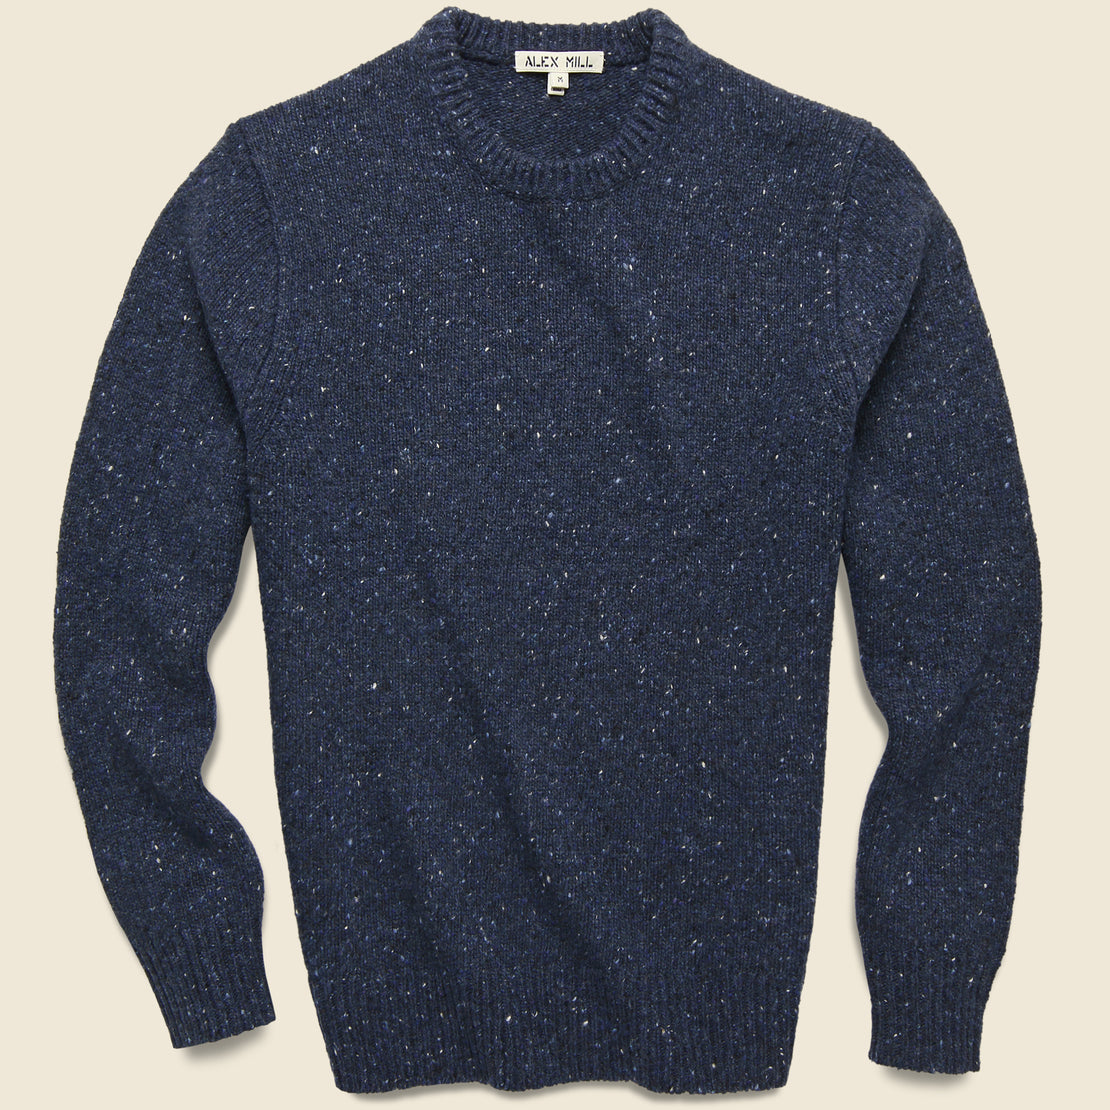 Alex Mill Donegal Wool Sweater - Navy